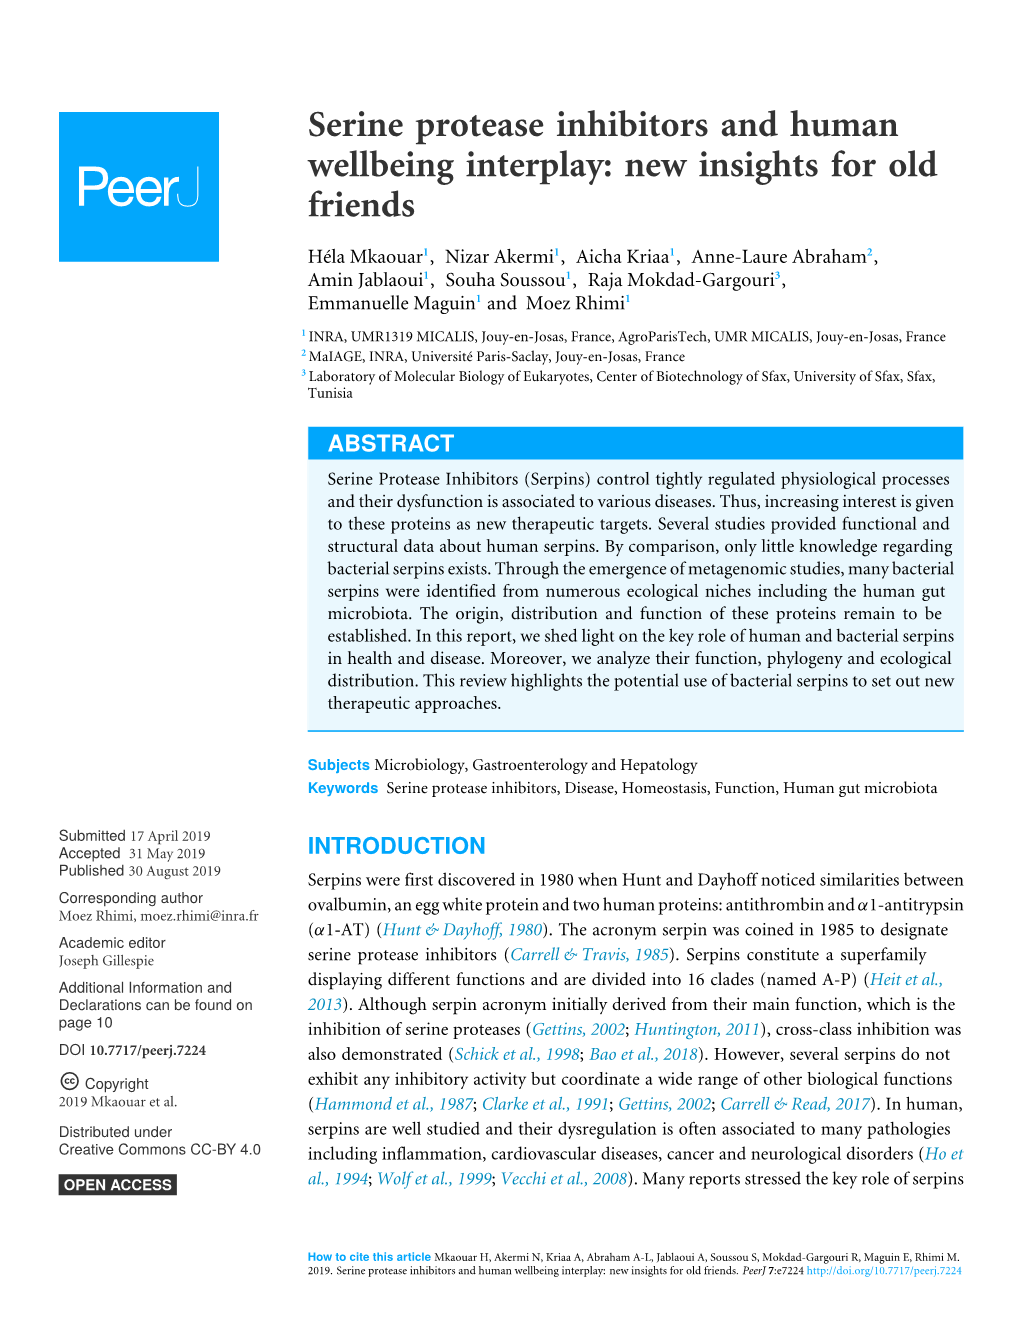 Serine Protease Inhibitors and Human Wellbeing Interplay: New Insights for Old Friends